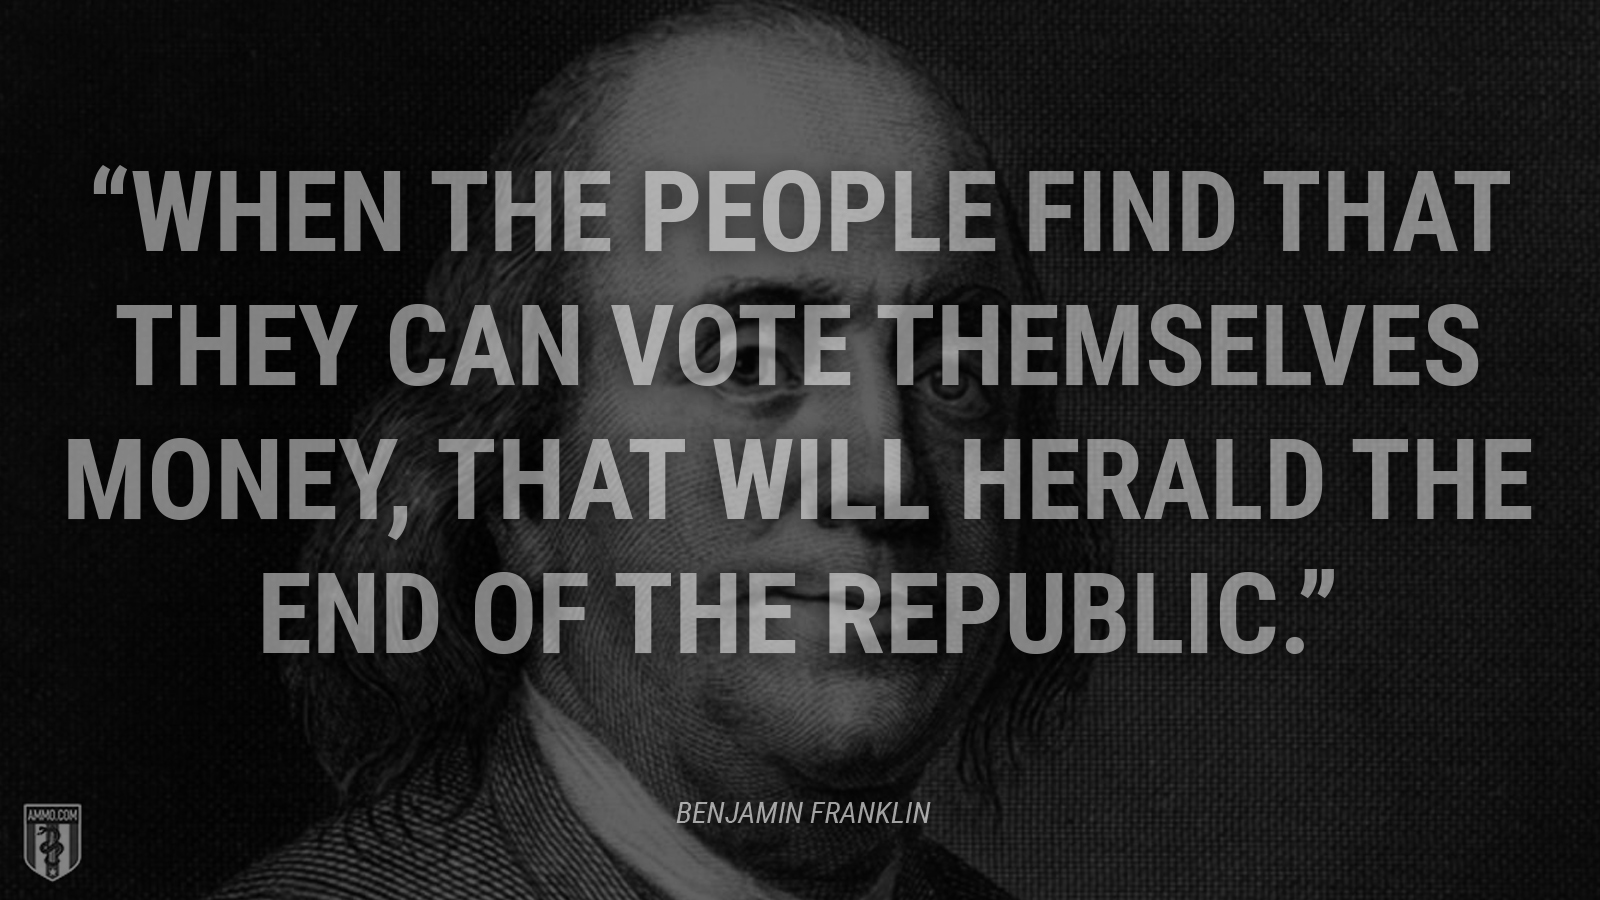 “When the people find that they can vote themselves money, that will herald the end of the republic.” - Benjamin Franklin